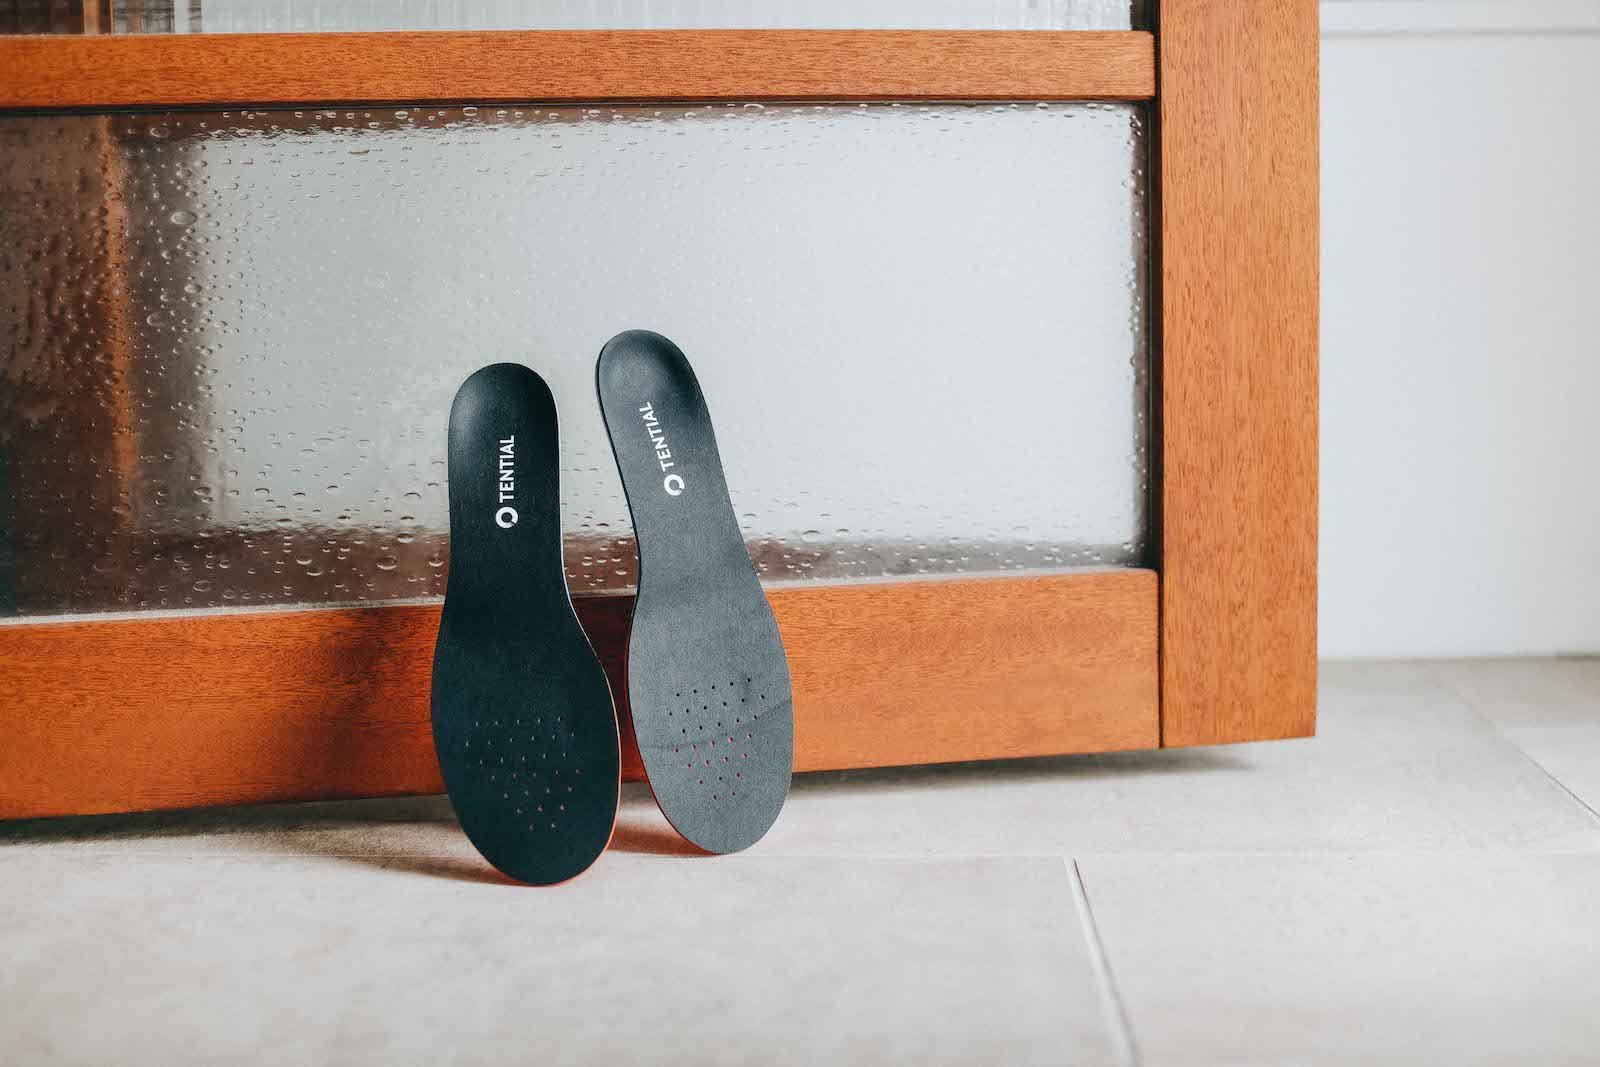 TENTIALの主力商品である「TENTIAL INSOLE」